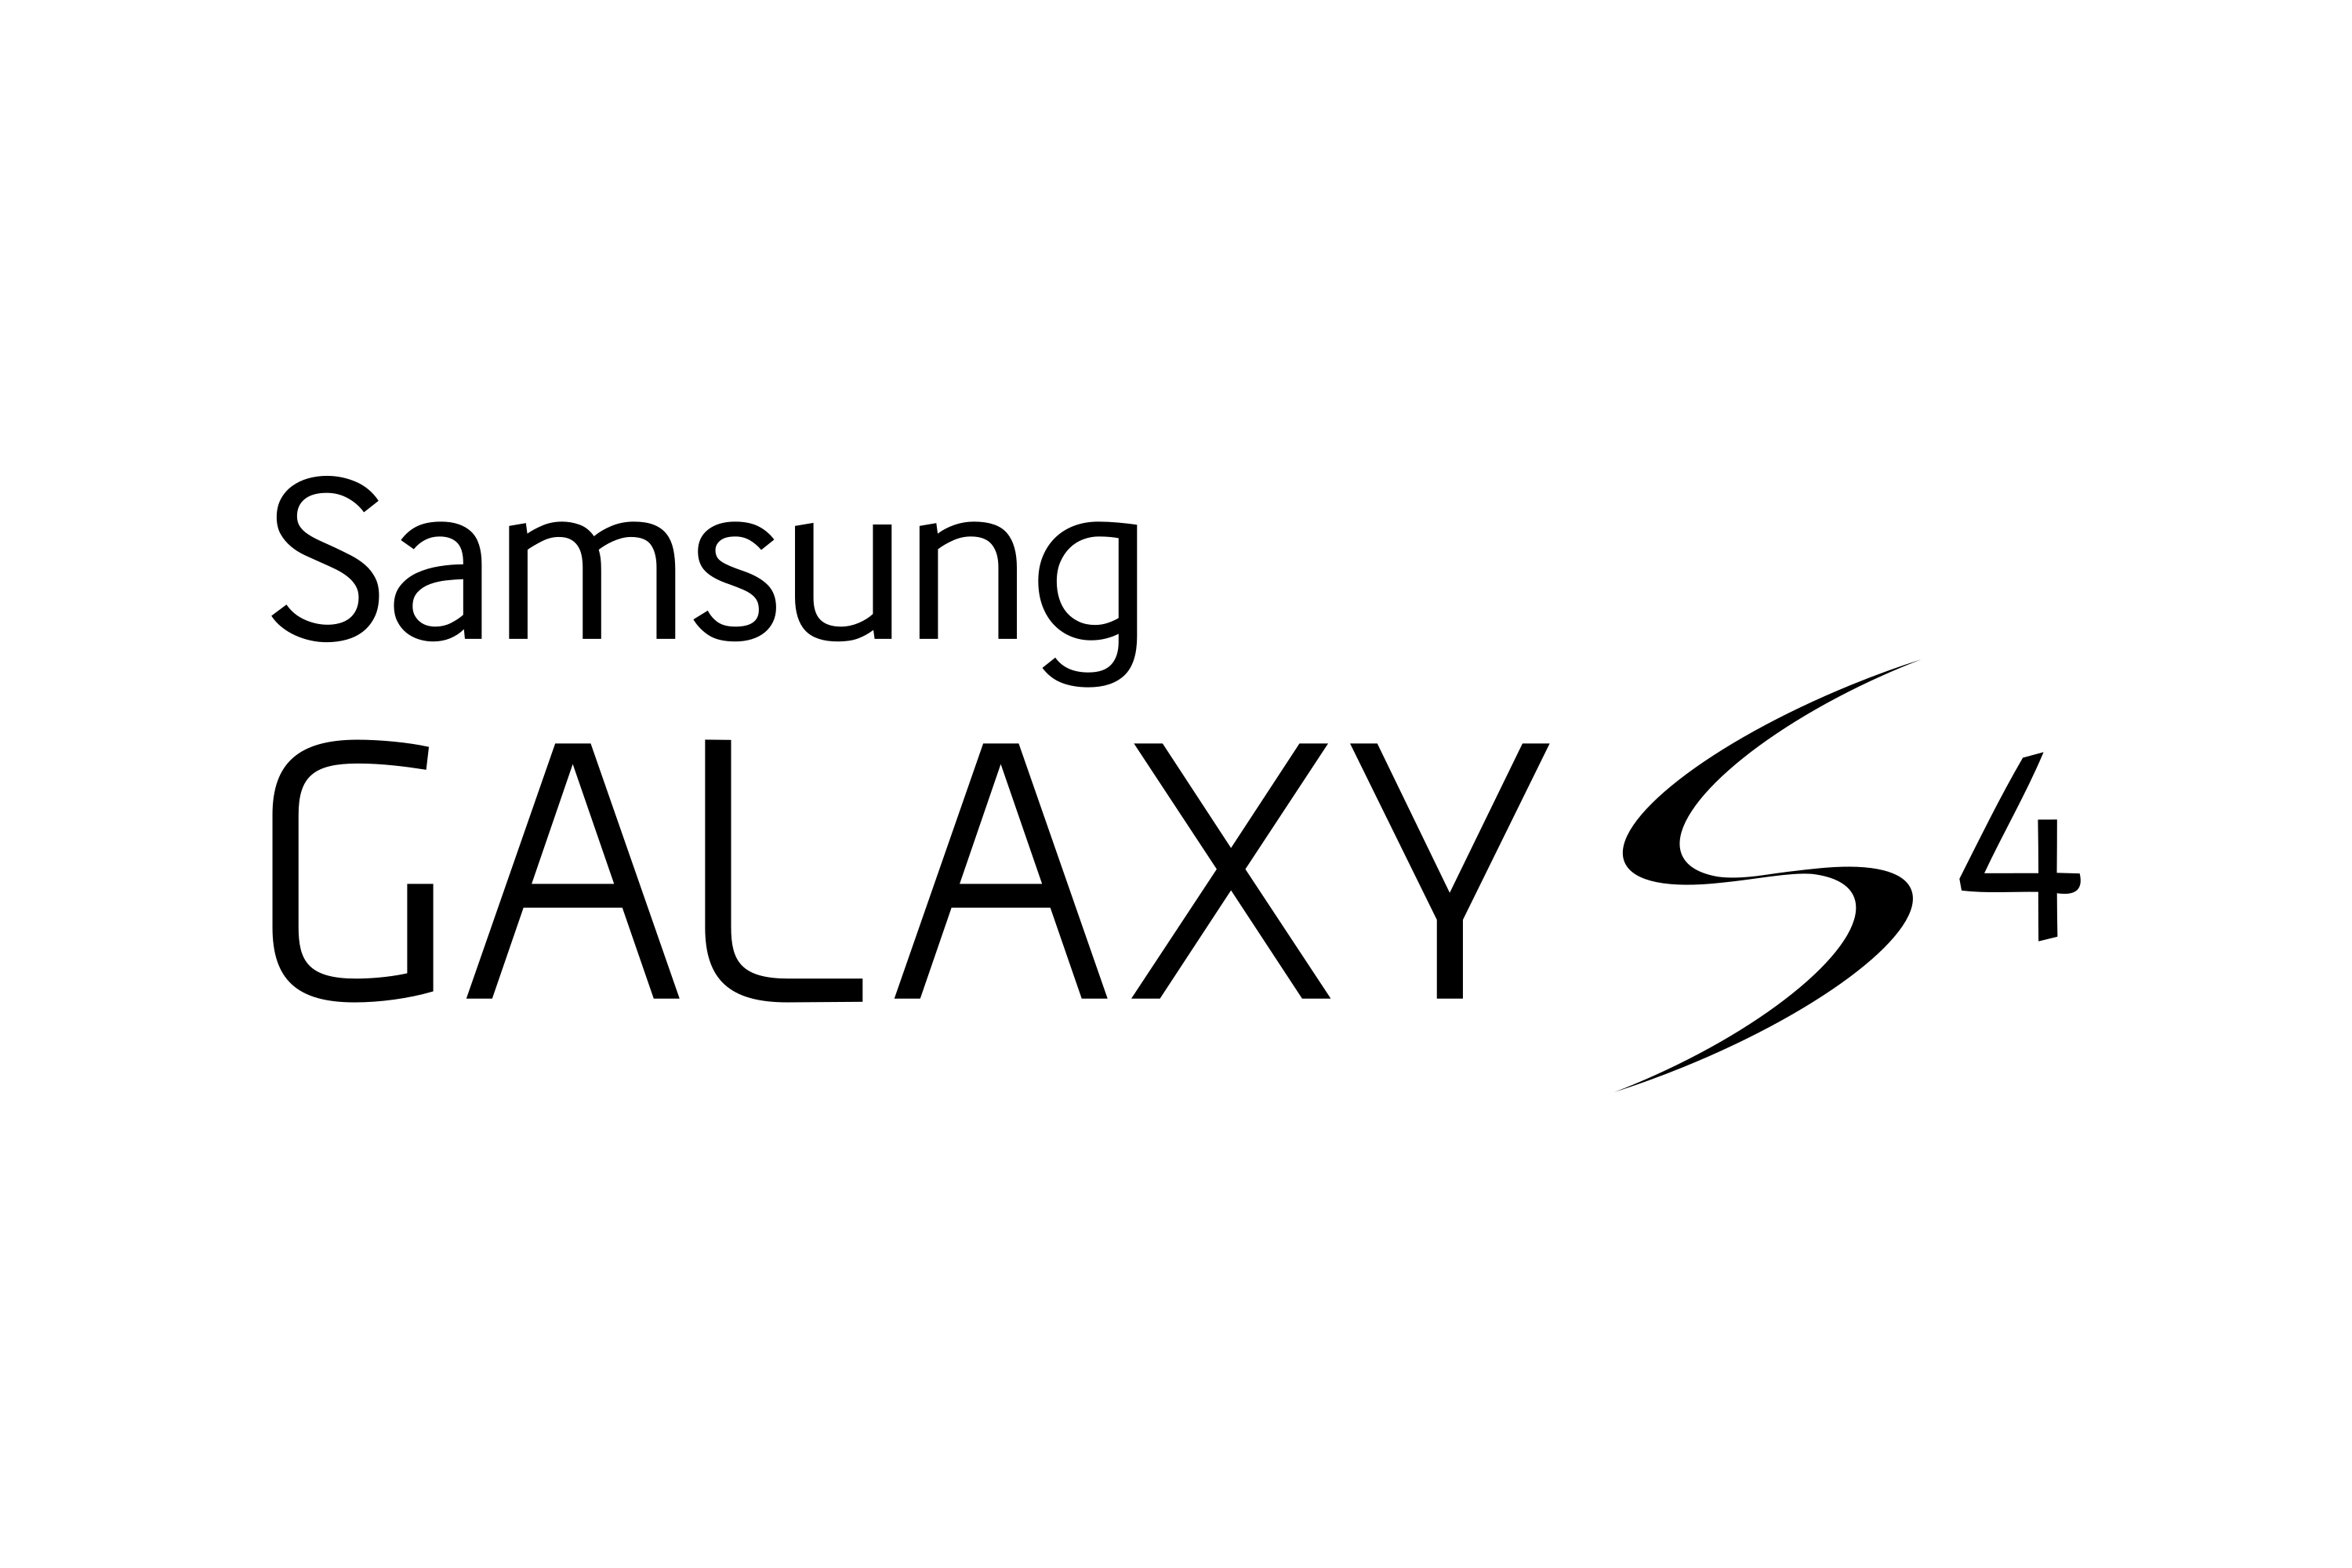 Download Samsung Galaxy S4 Logo In Svg Vector Or Png File Format Logo Wine